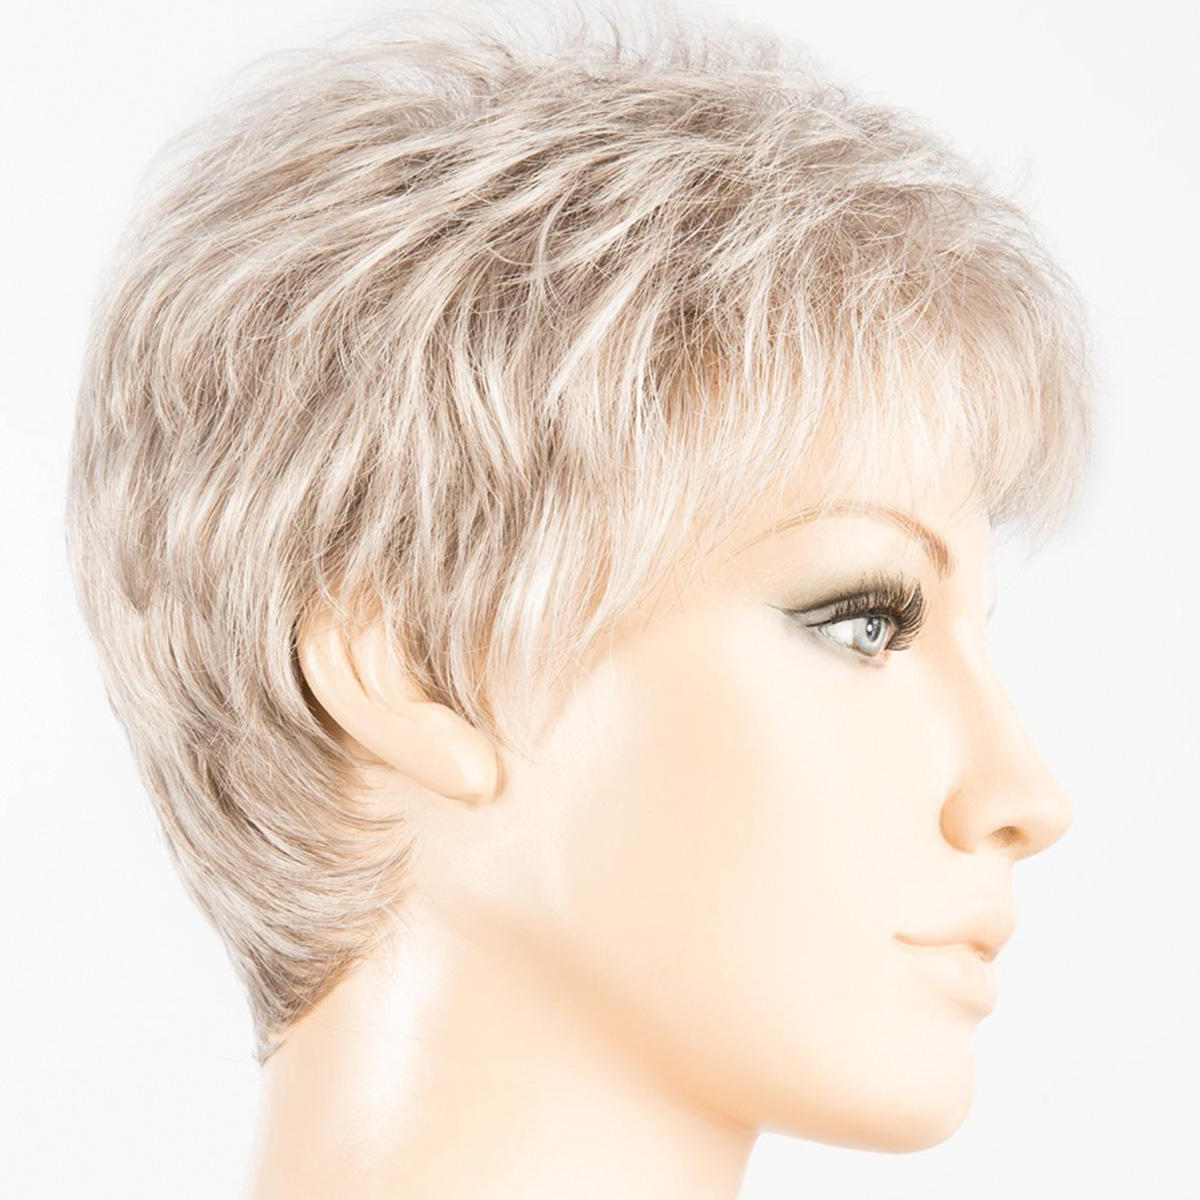 Ellen Wille Synthetic Hair Wig Tab silver mix - 1